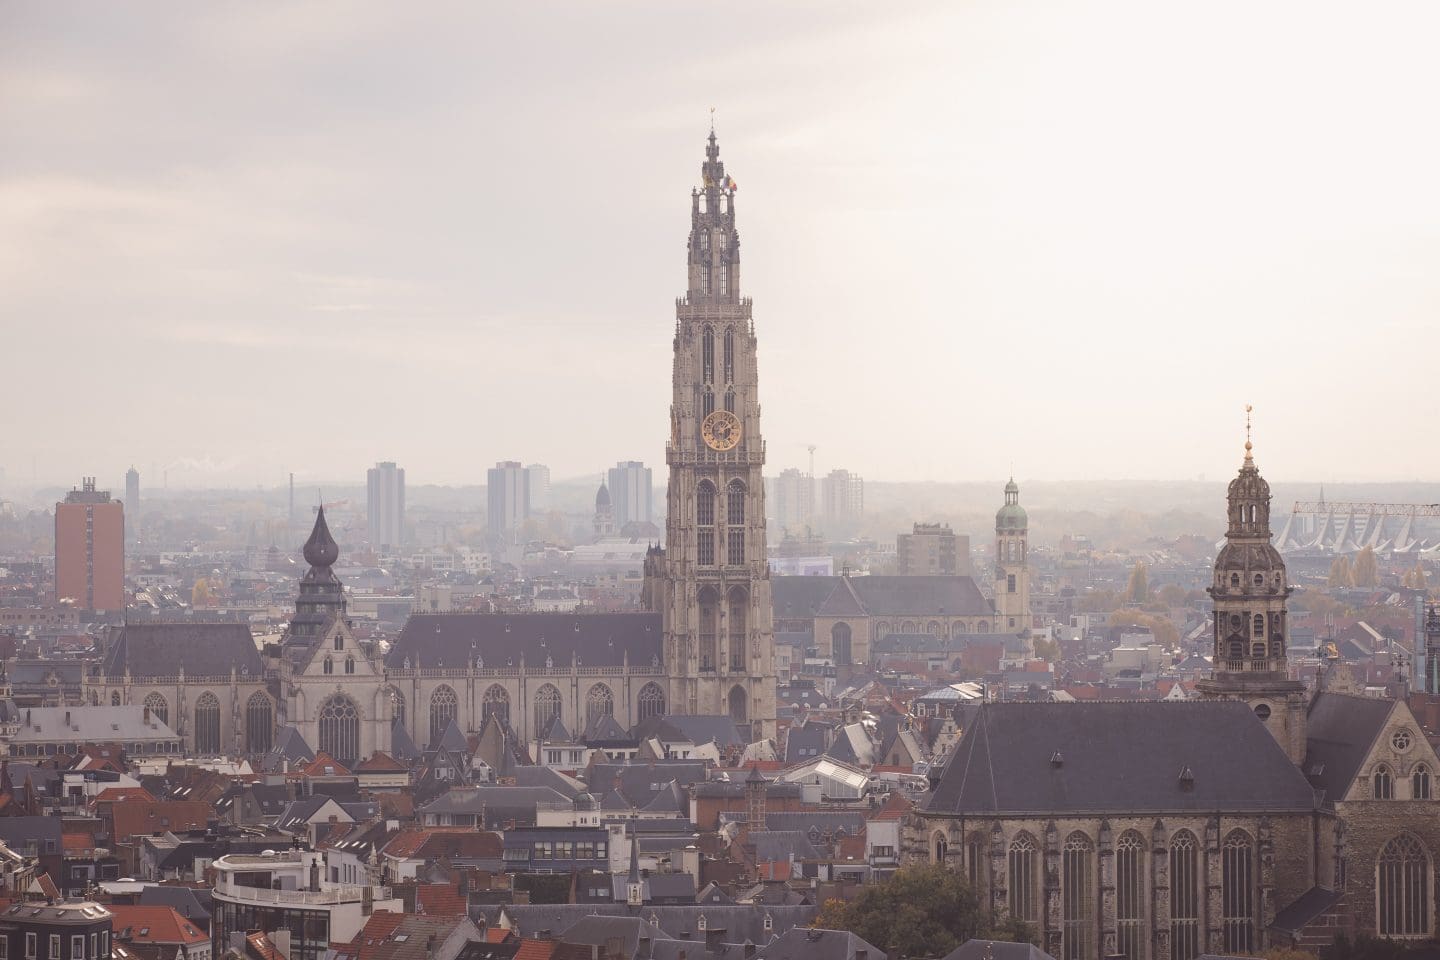 one day in antwerp